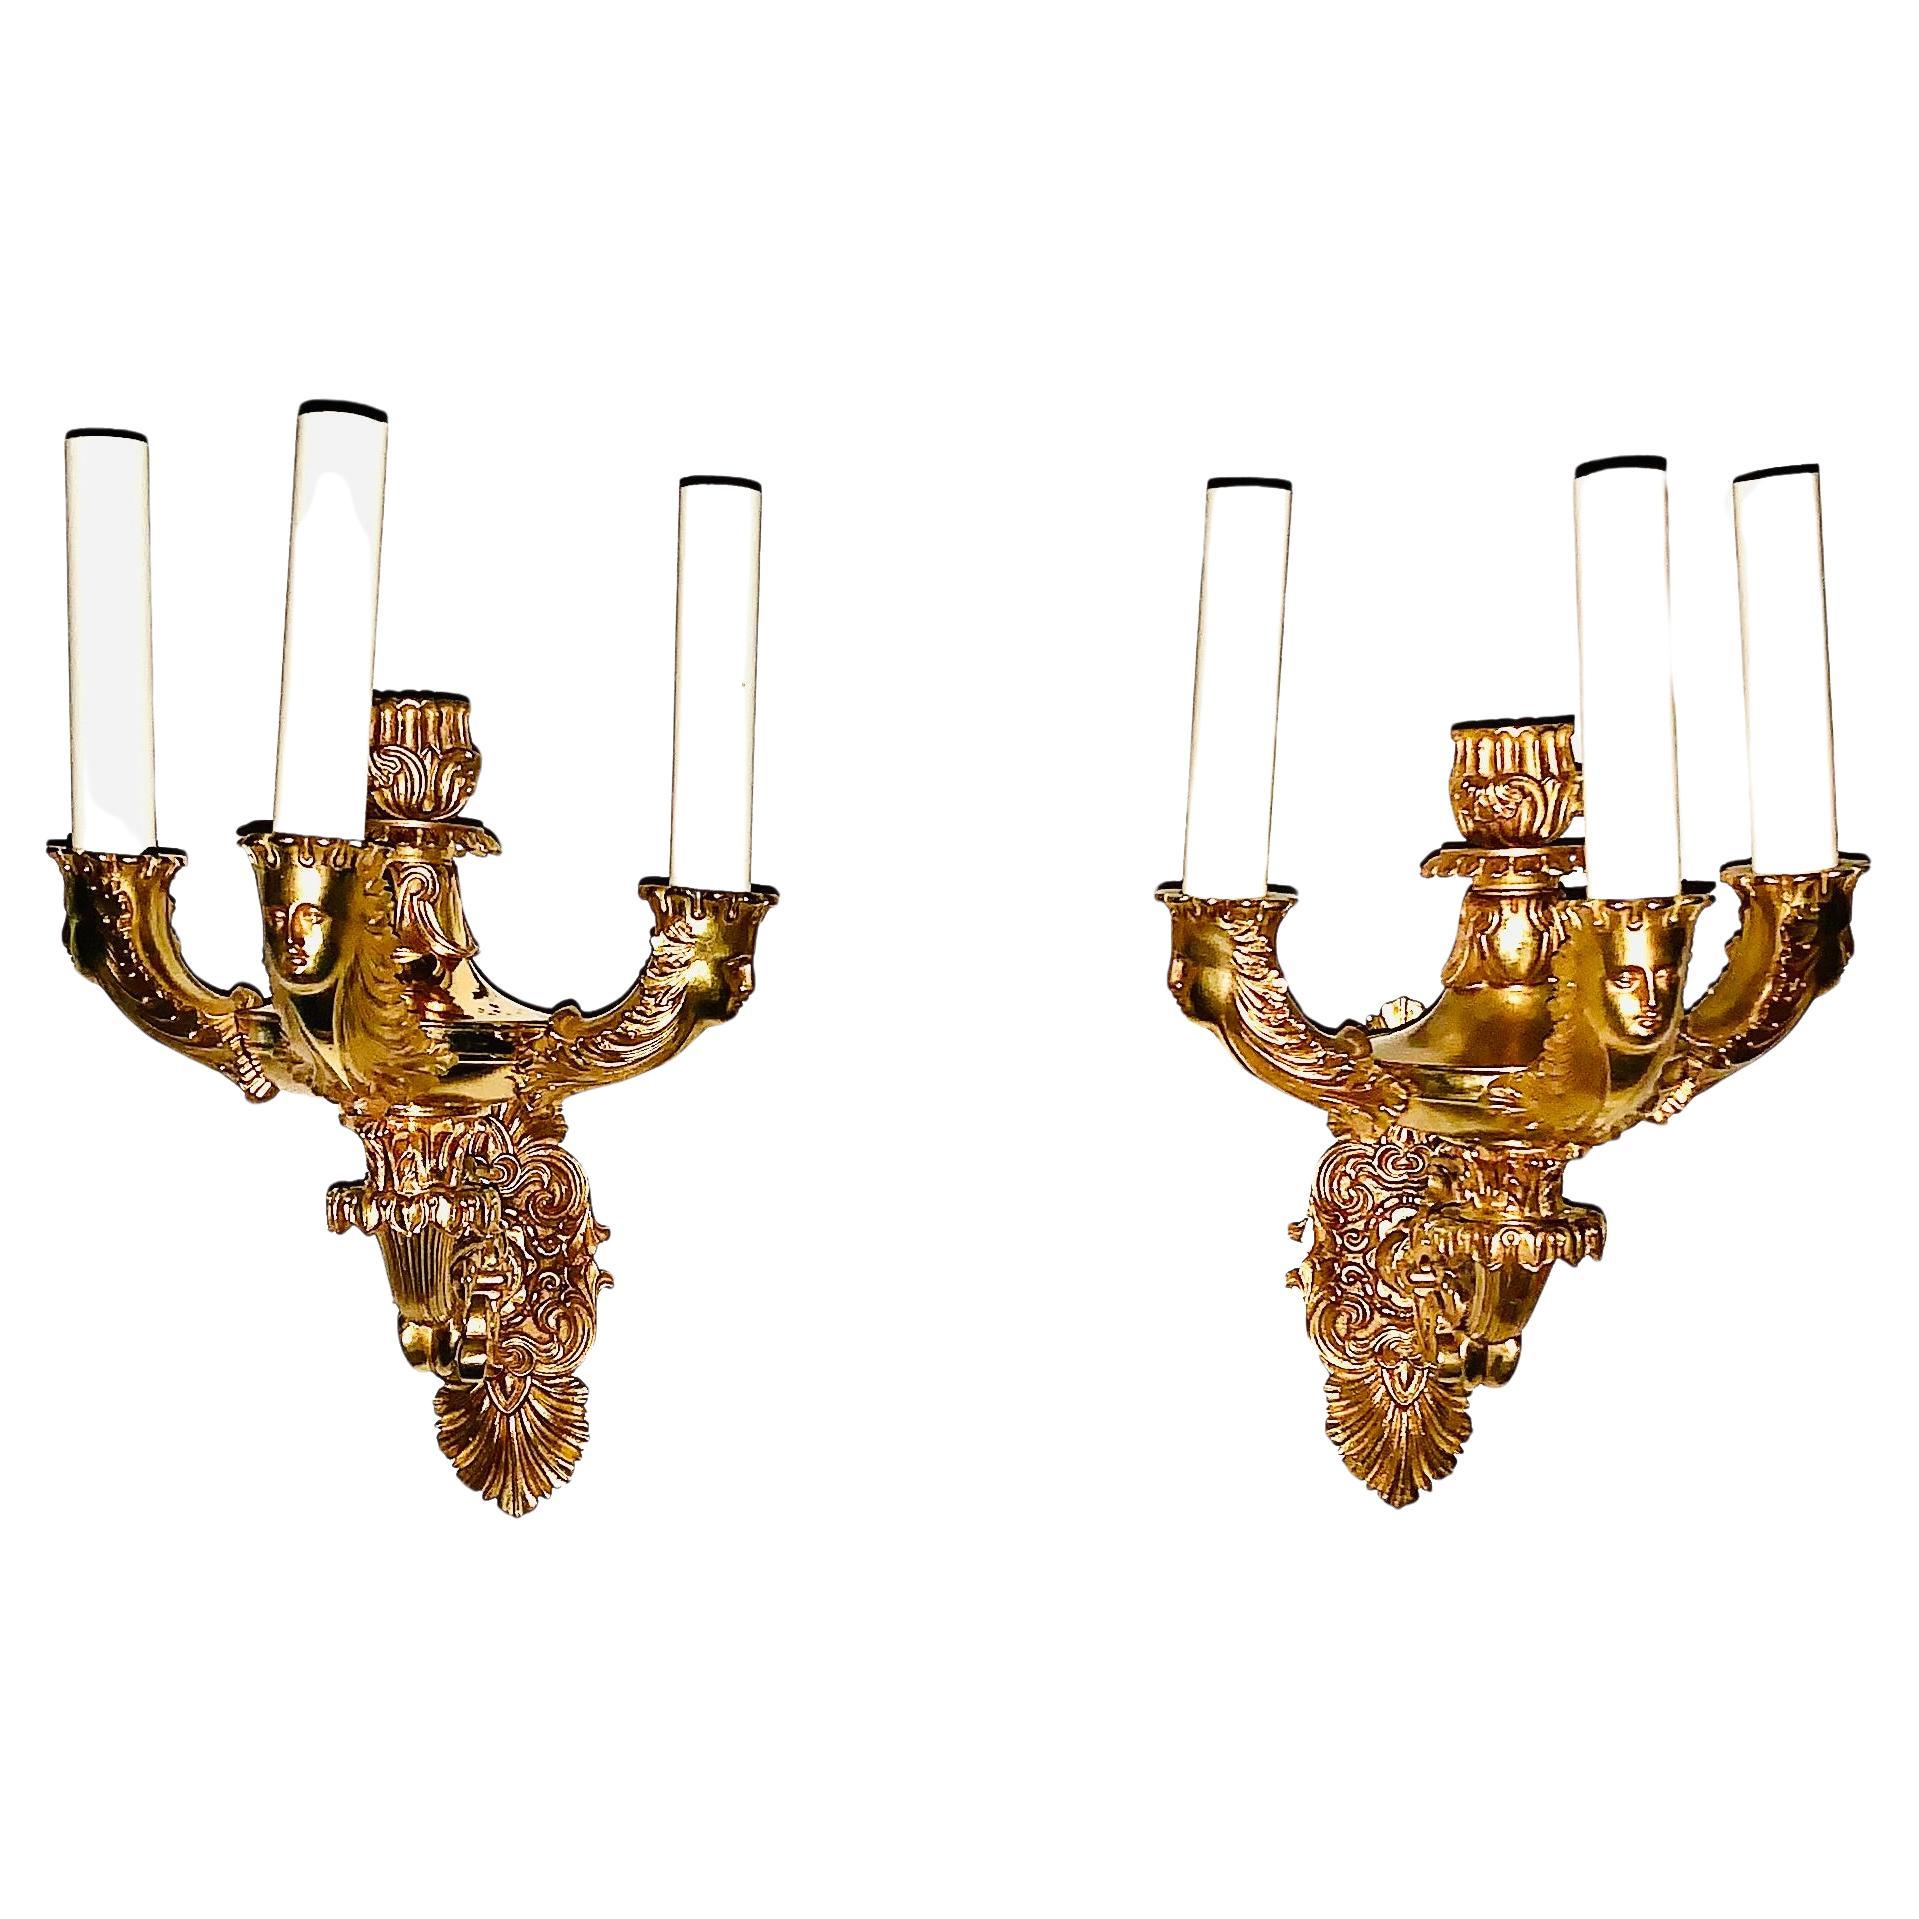 Fine Pair French Empire Period Gilt Bronze Figural Three Light Sconces For Sale